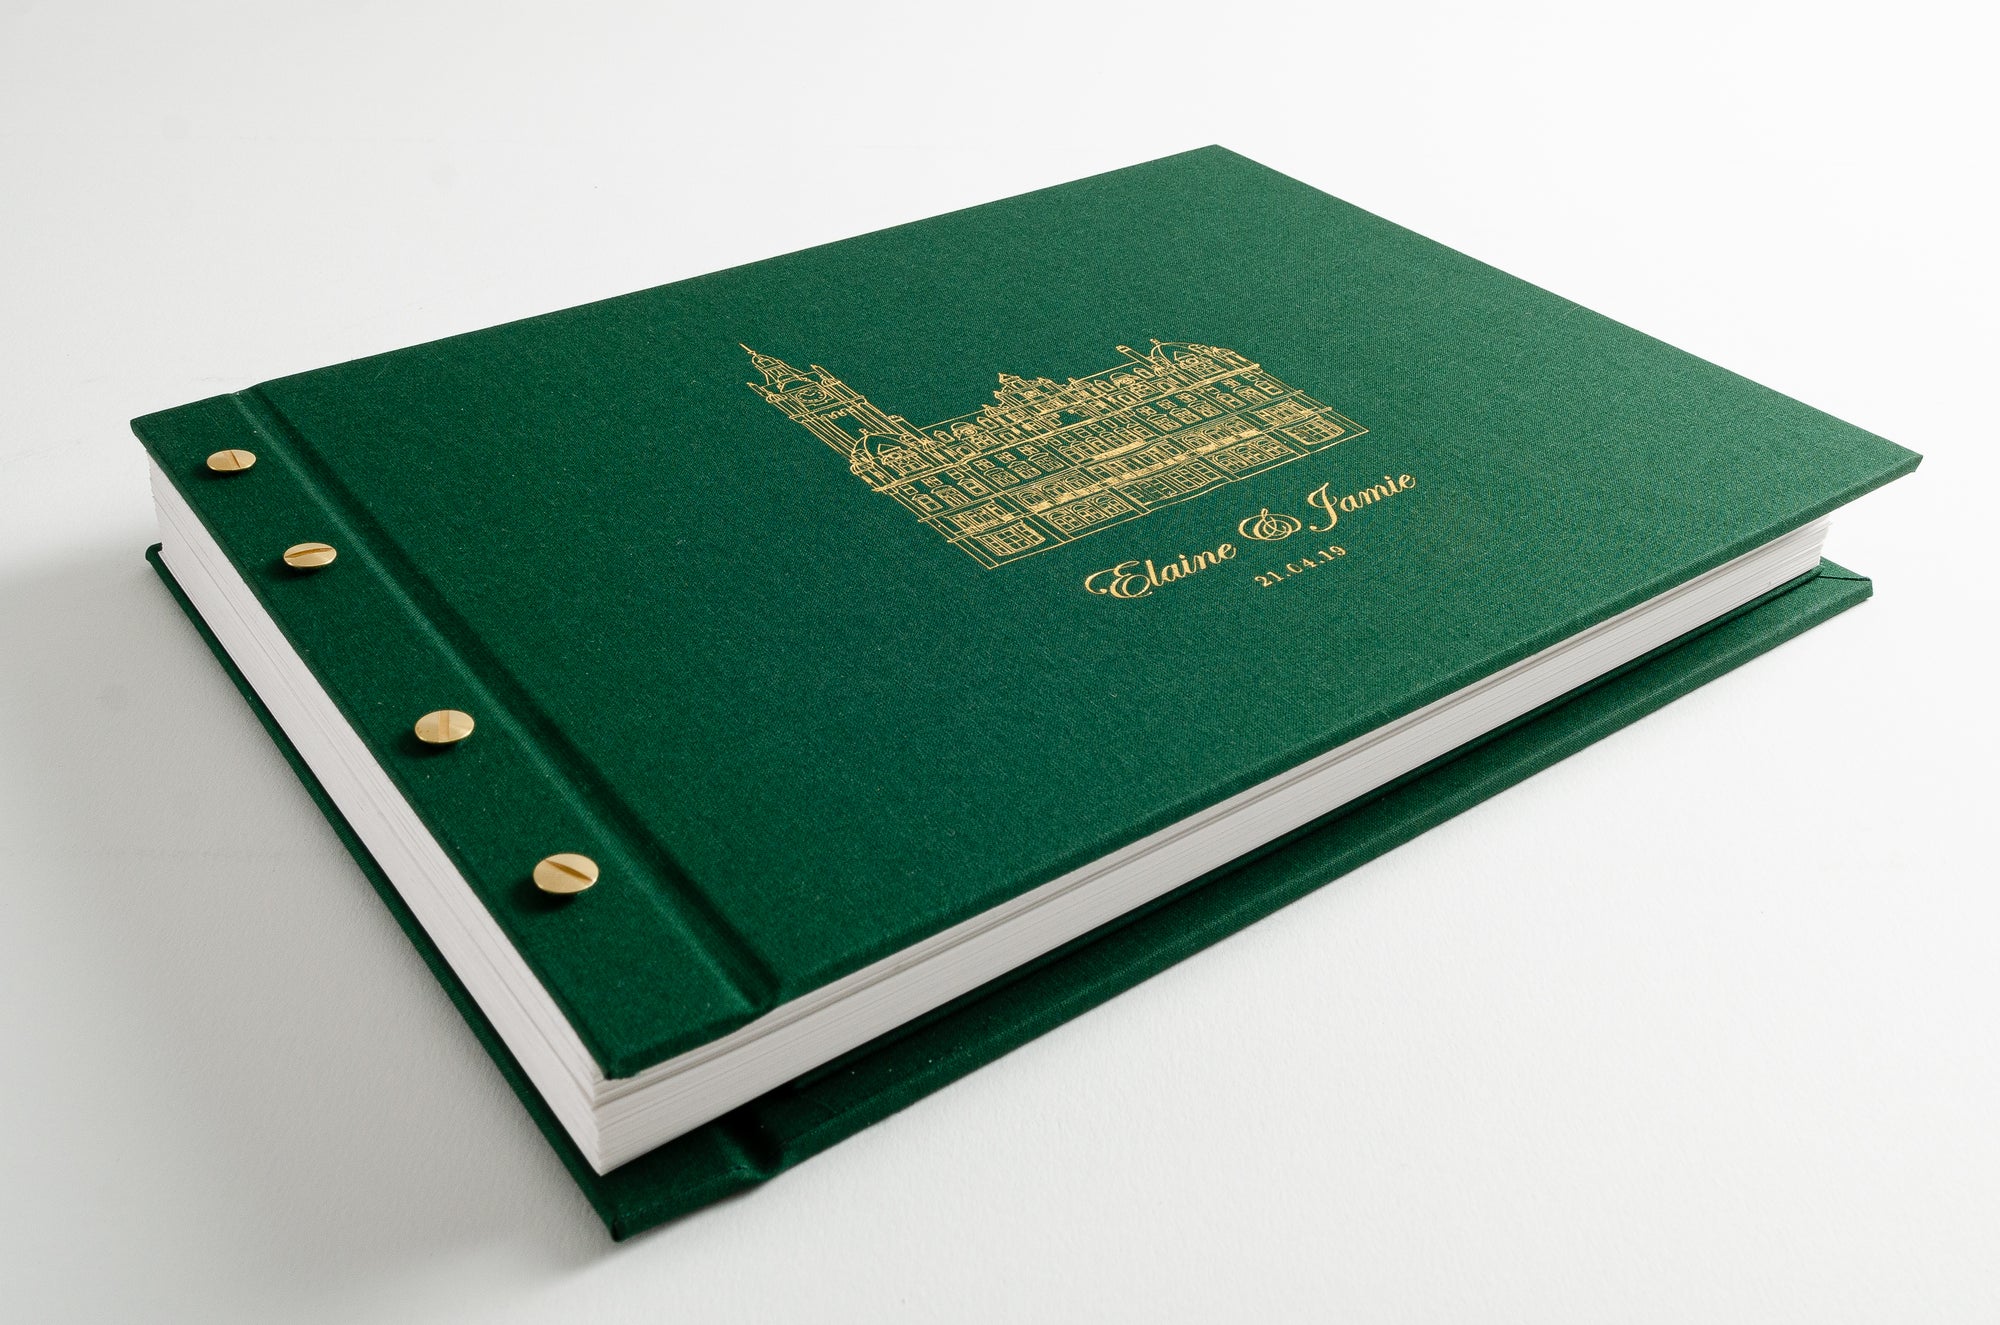 Custom made wedding album with gold foil detailing on cover